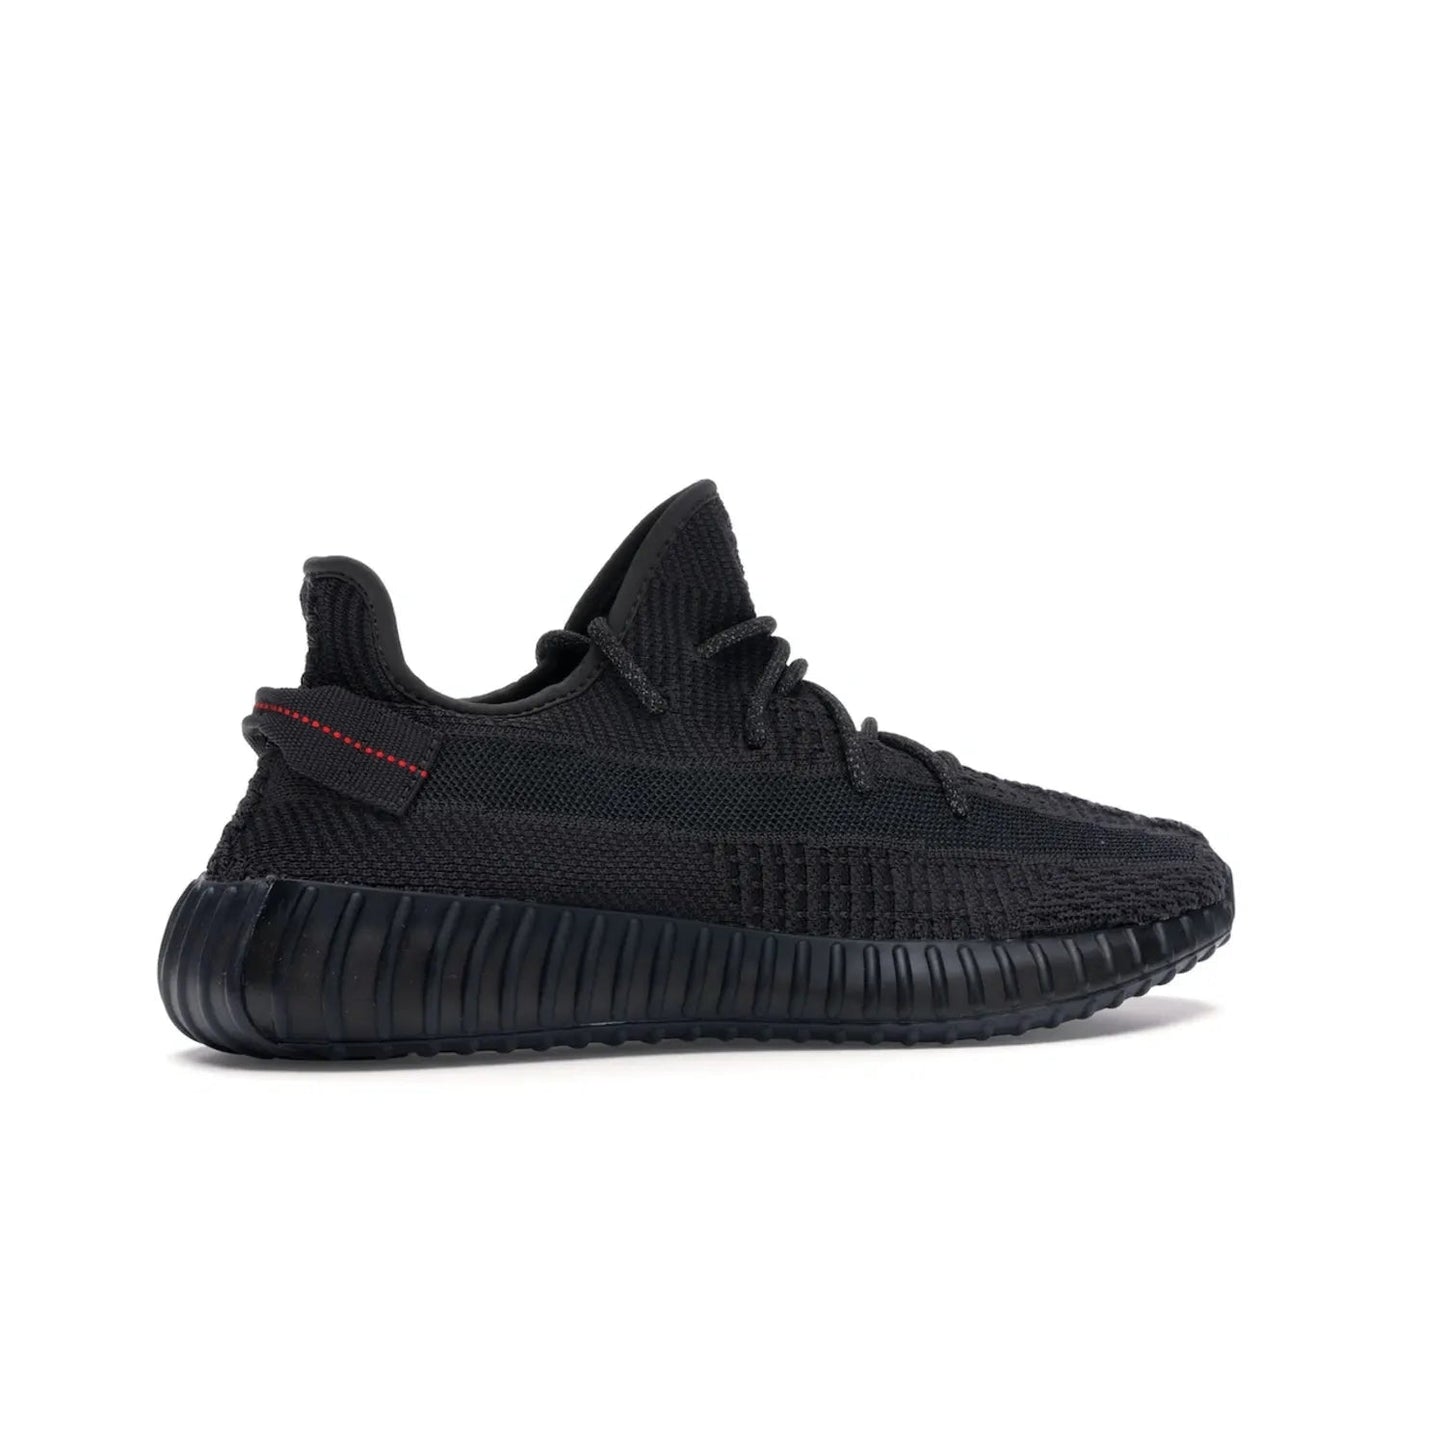 adidas Yeezy Boost 350 V2 Black (Non-Reflective) - Image 35 - Only at www.BallersClubKickz.com - A timeless, sleek silhouette crafted from quality materials. The adidas Yeezy Boost 350 V2 Black (Non-Reflective) brings style and sophistication. Get yours now!